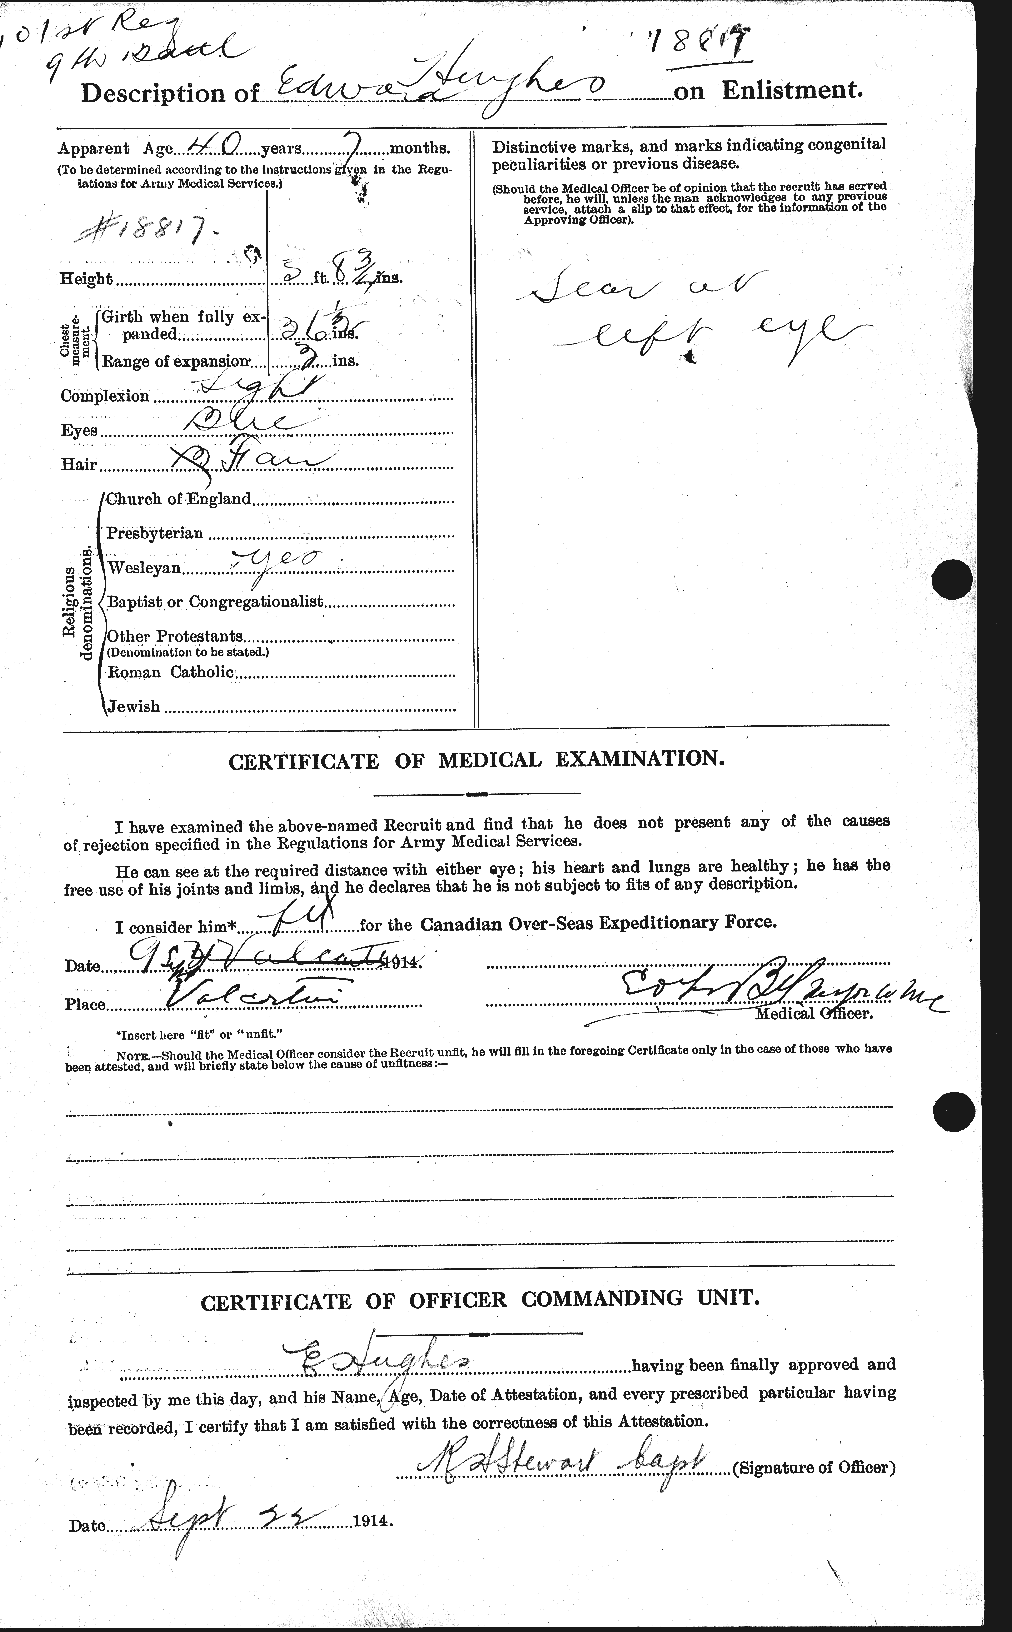 Personnel Records of the First World War - CEF 402690b